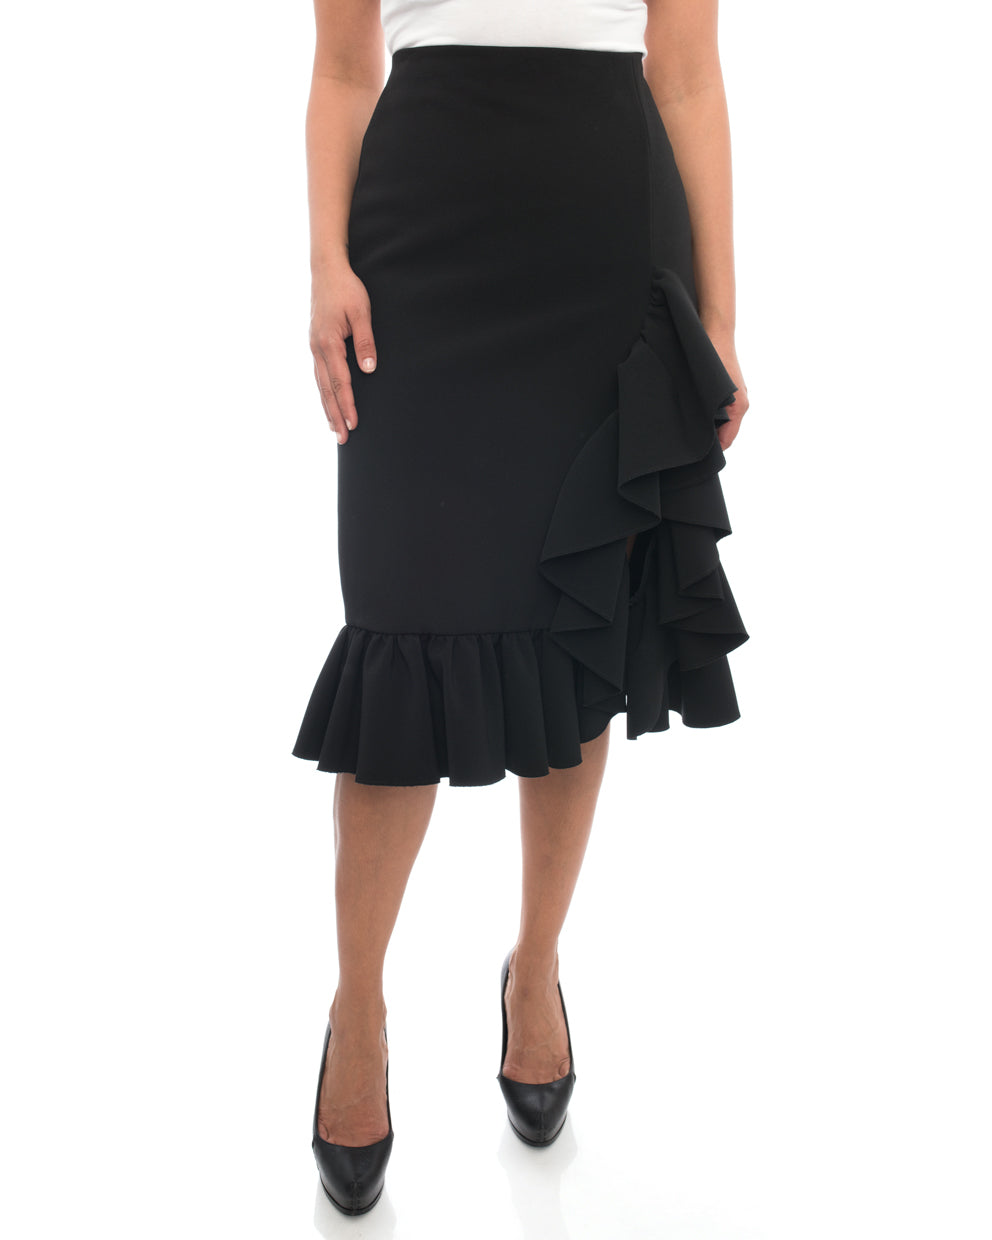 MSGM Black Ruffle Skirt with Front Slit - 8